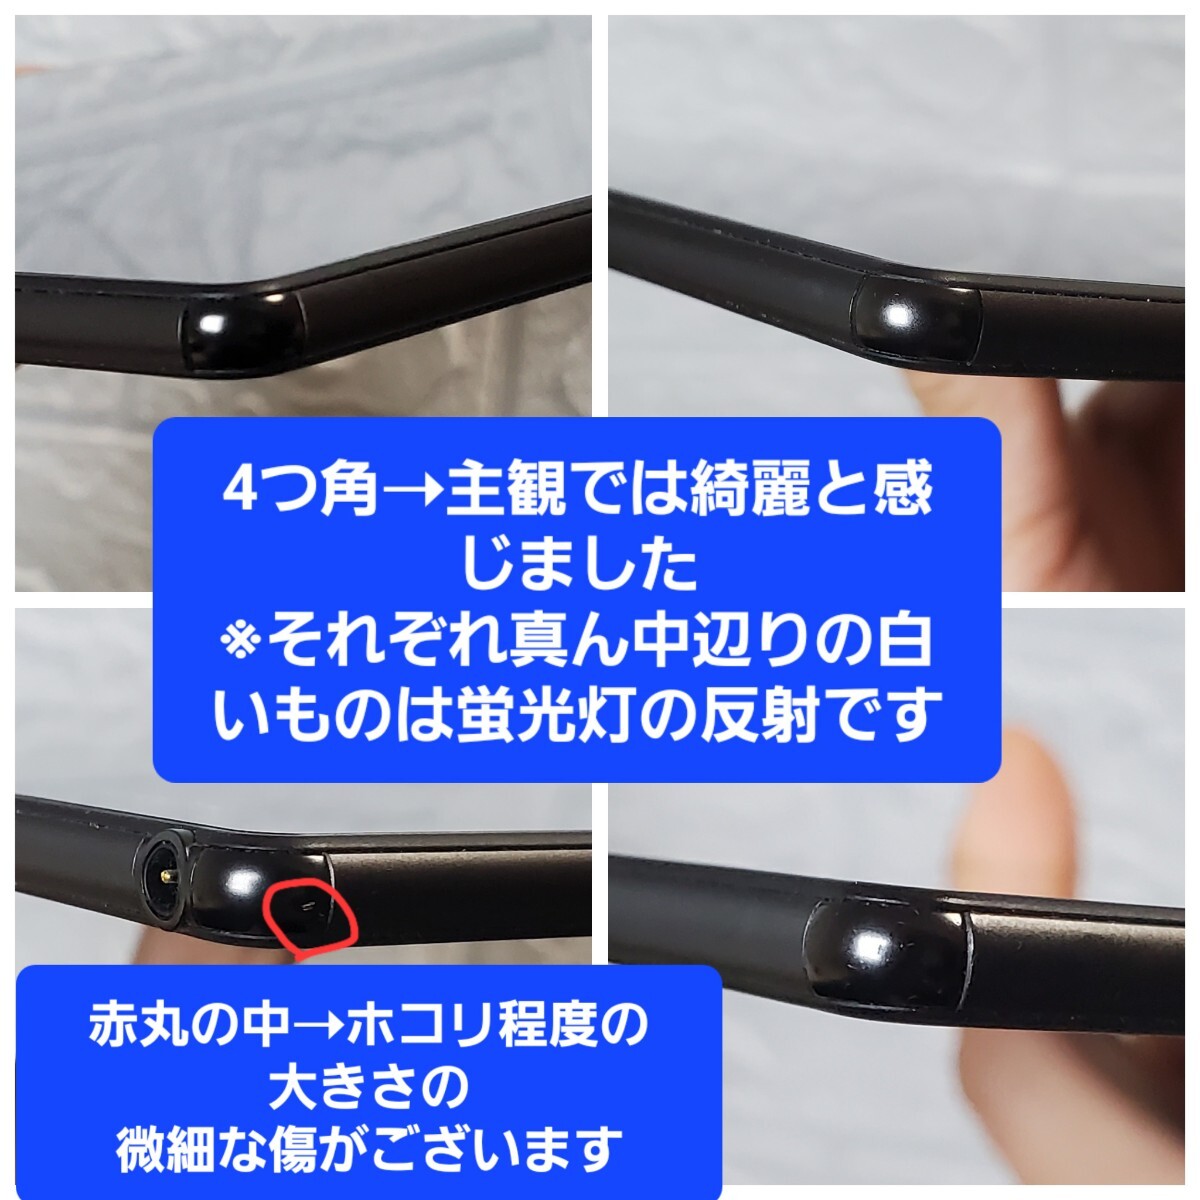 ①Xperia Z4 Tablet AU SOT31 バッテリー能力は新品級 フルセグTV 重さ393g 2k解像度 利用制限◯ 防水 Android7.0_画像5